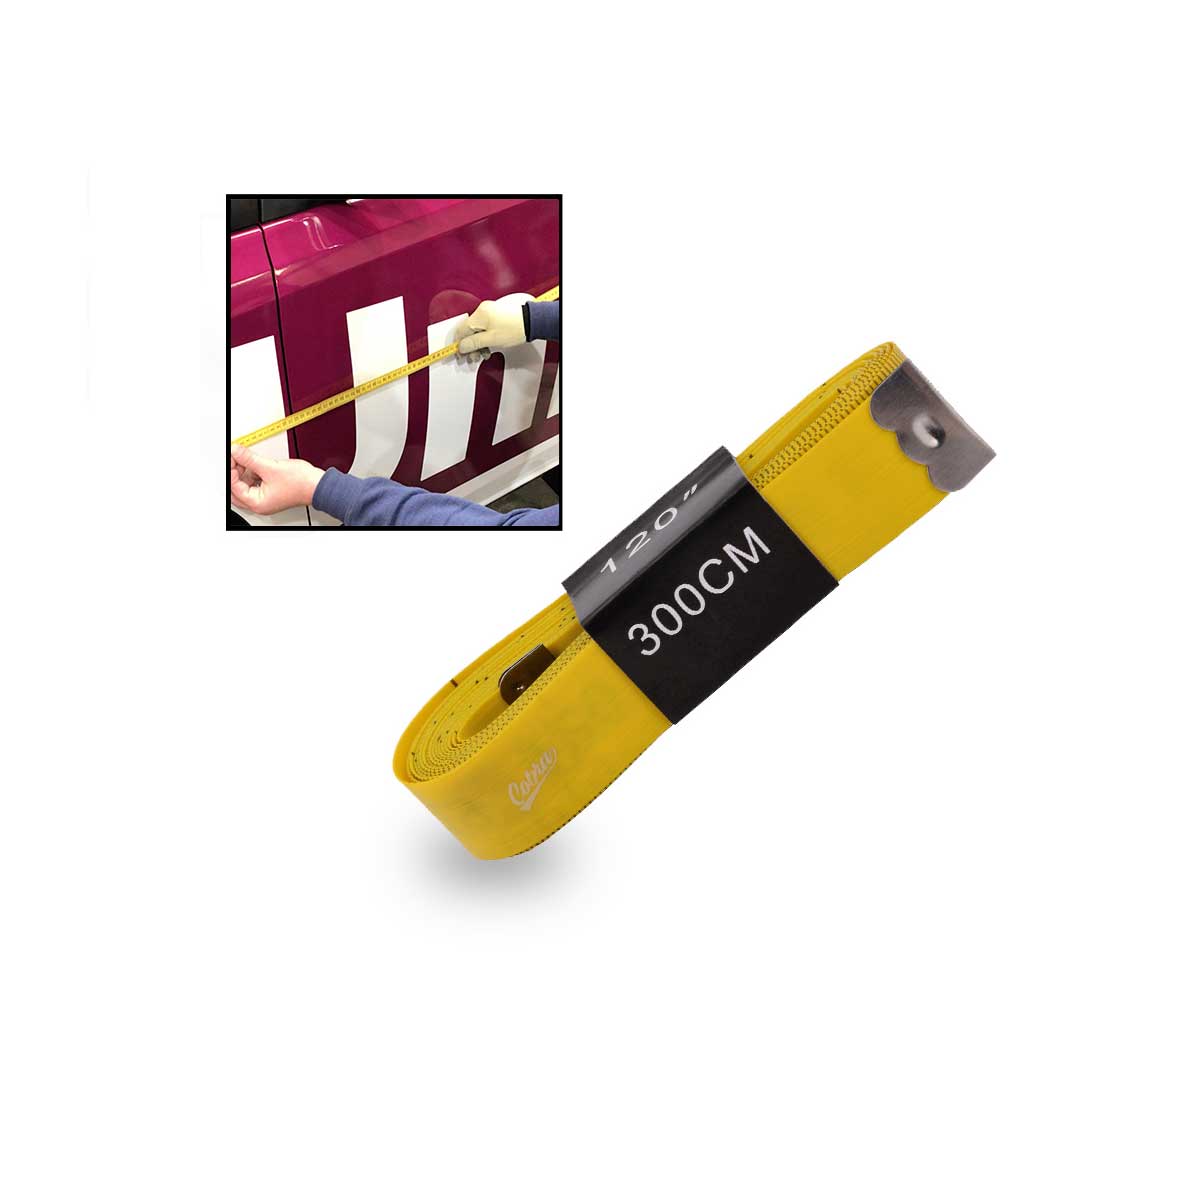 Soft Tape Measure with Magnet Online USA.